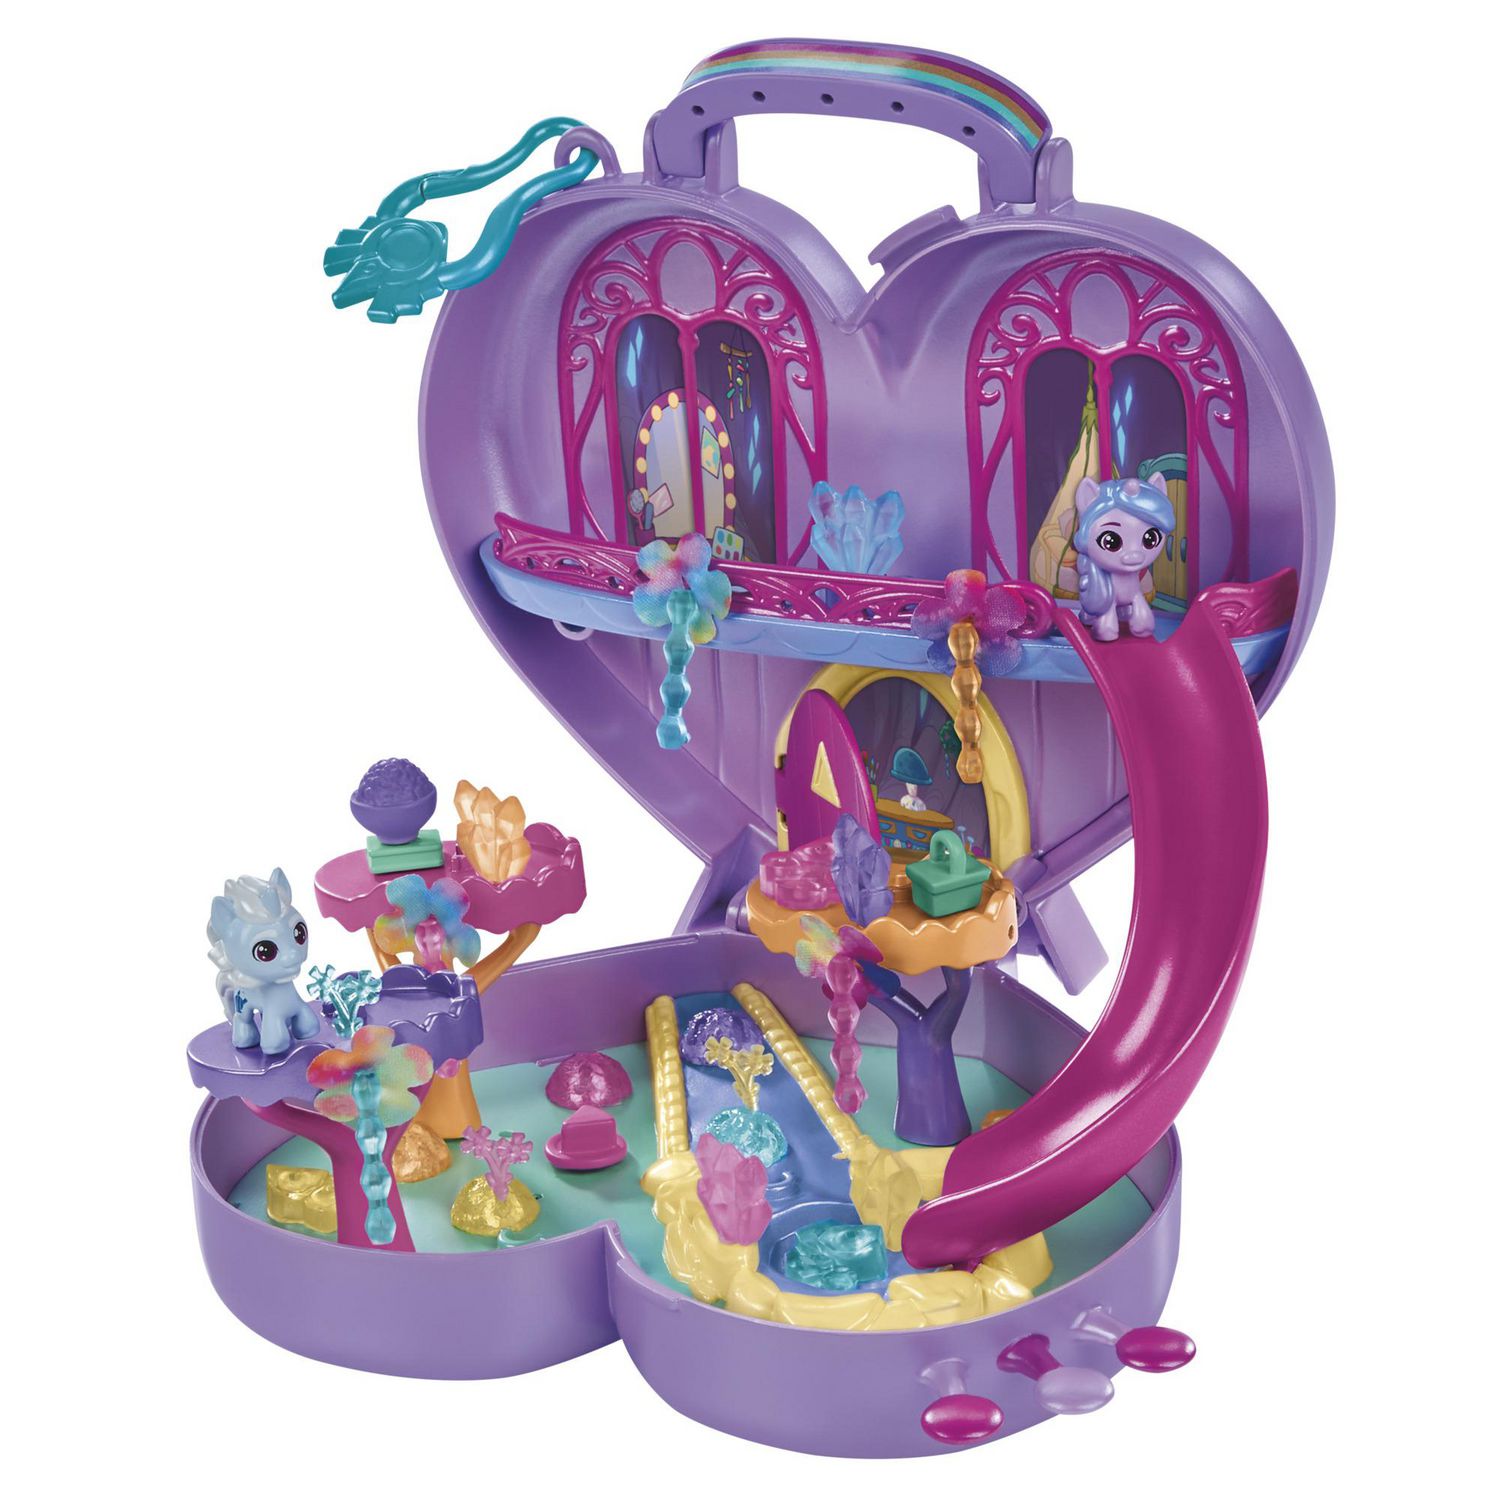 My Little Pony Toy My Baby Twilight Sparkle Doll Playset, 4 Pieces Included  